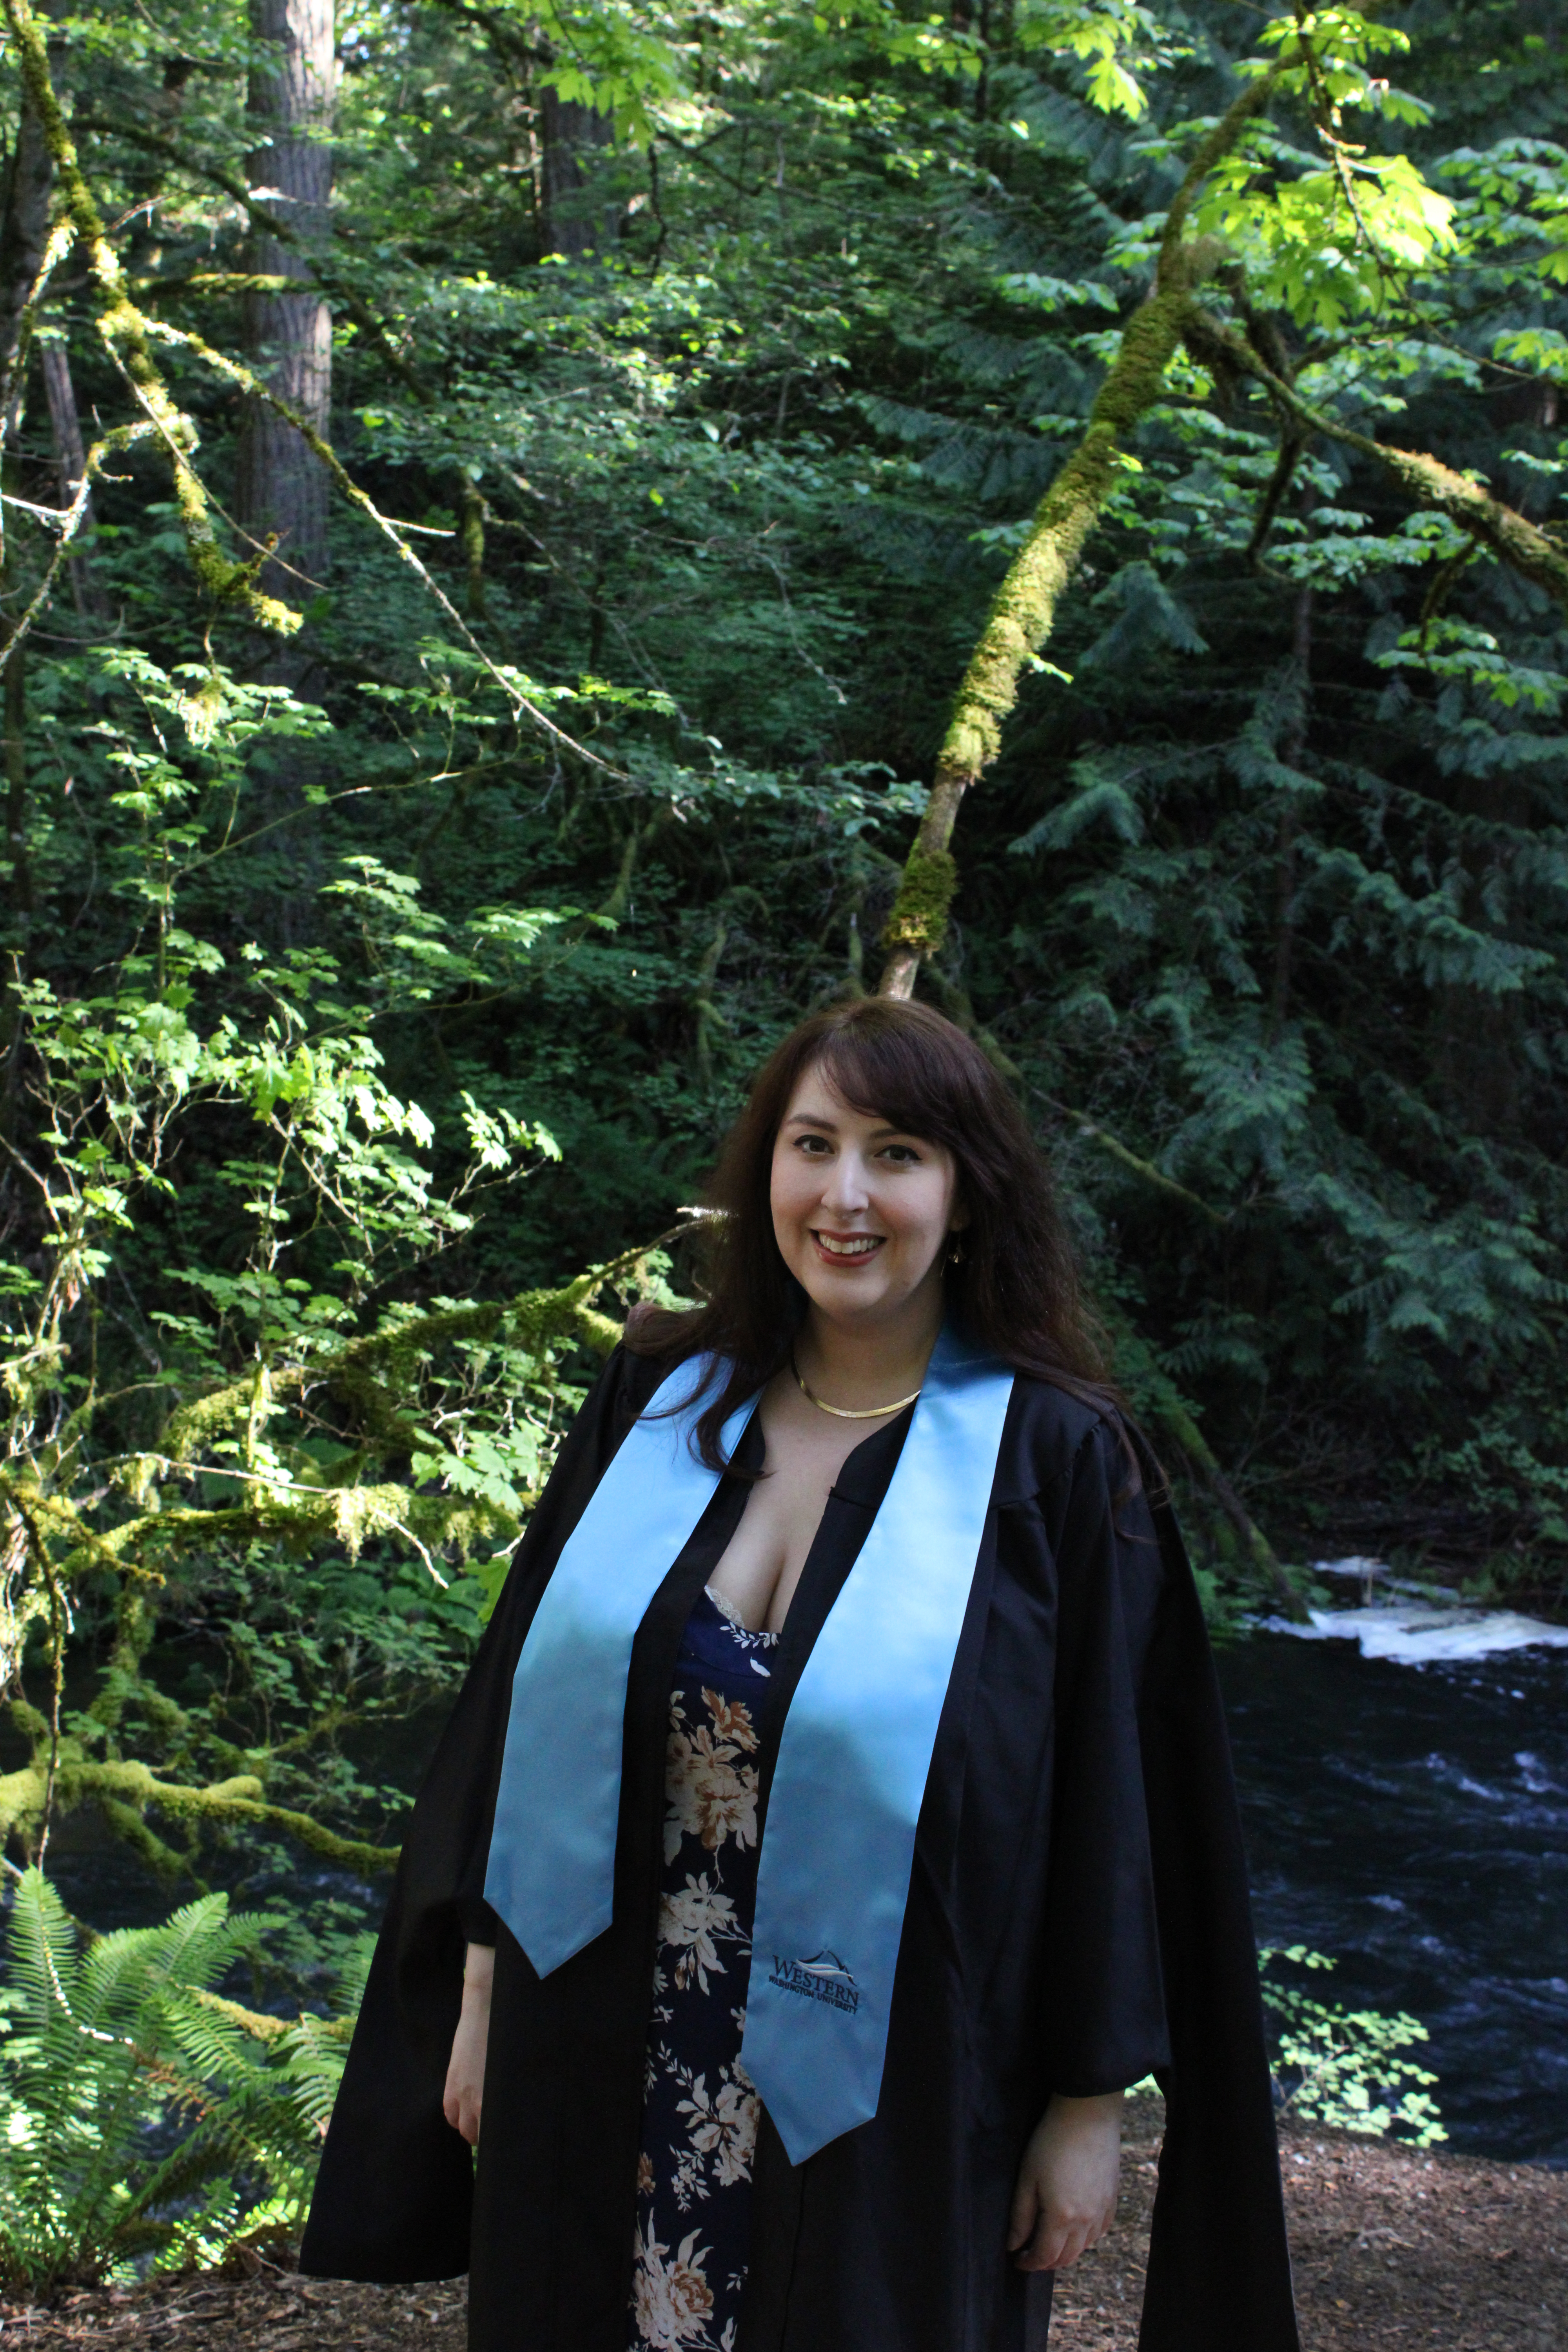 Holly Suther poses in a shady forest wearing graduation regalia